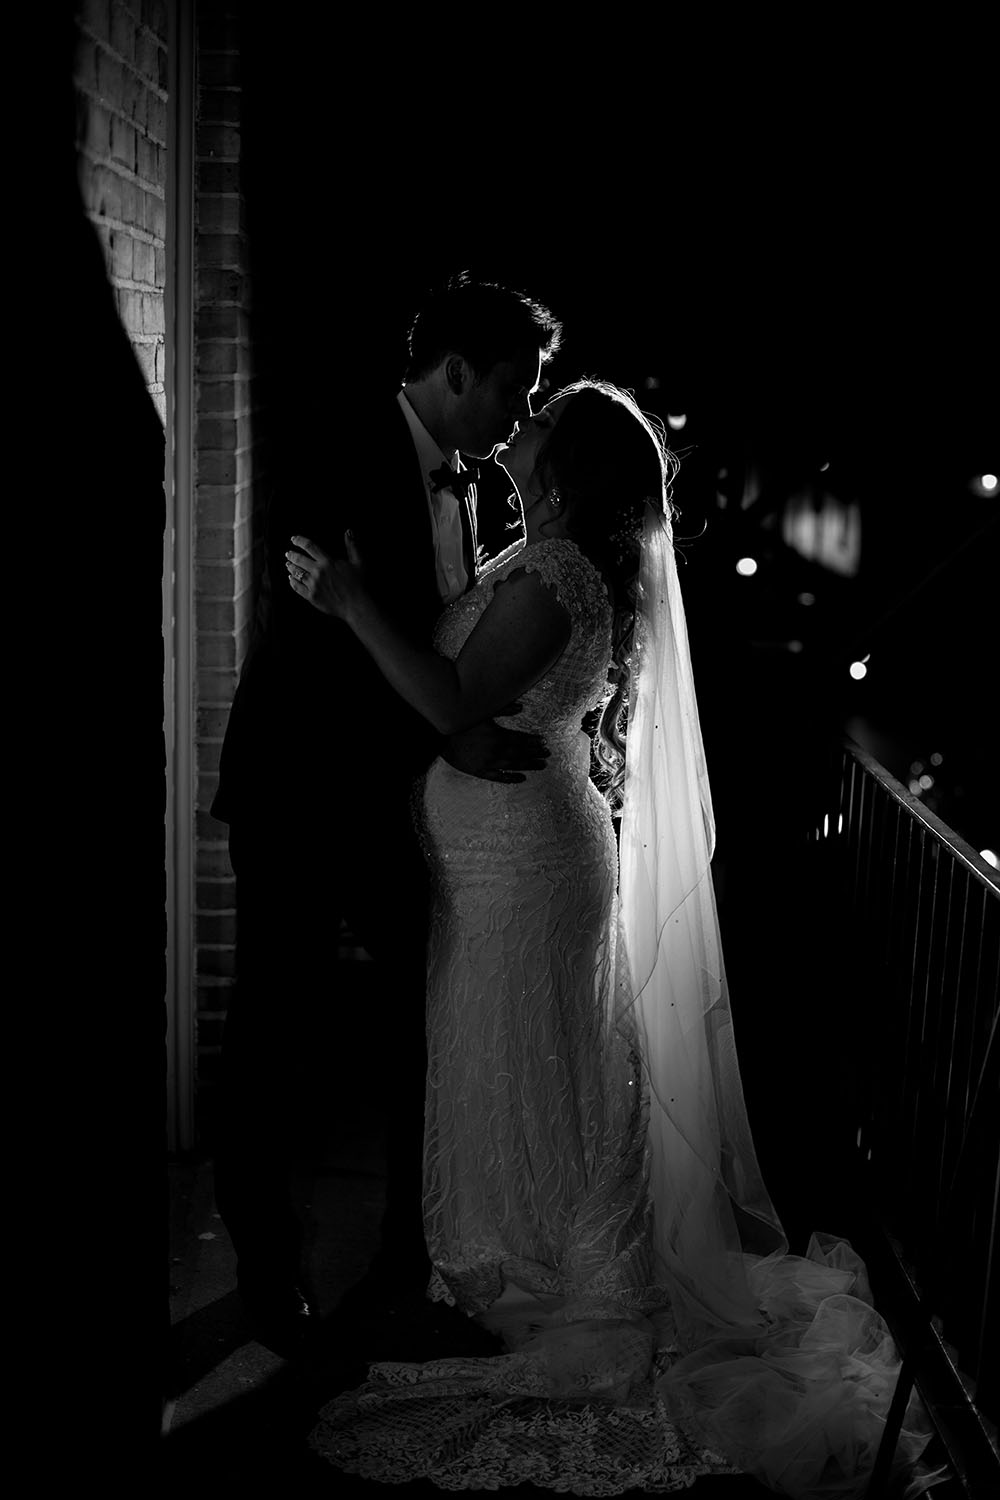 bride and groom embracing in a romantic black and white photo